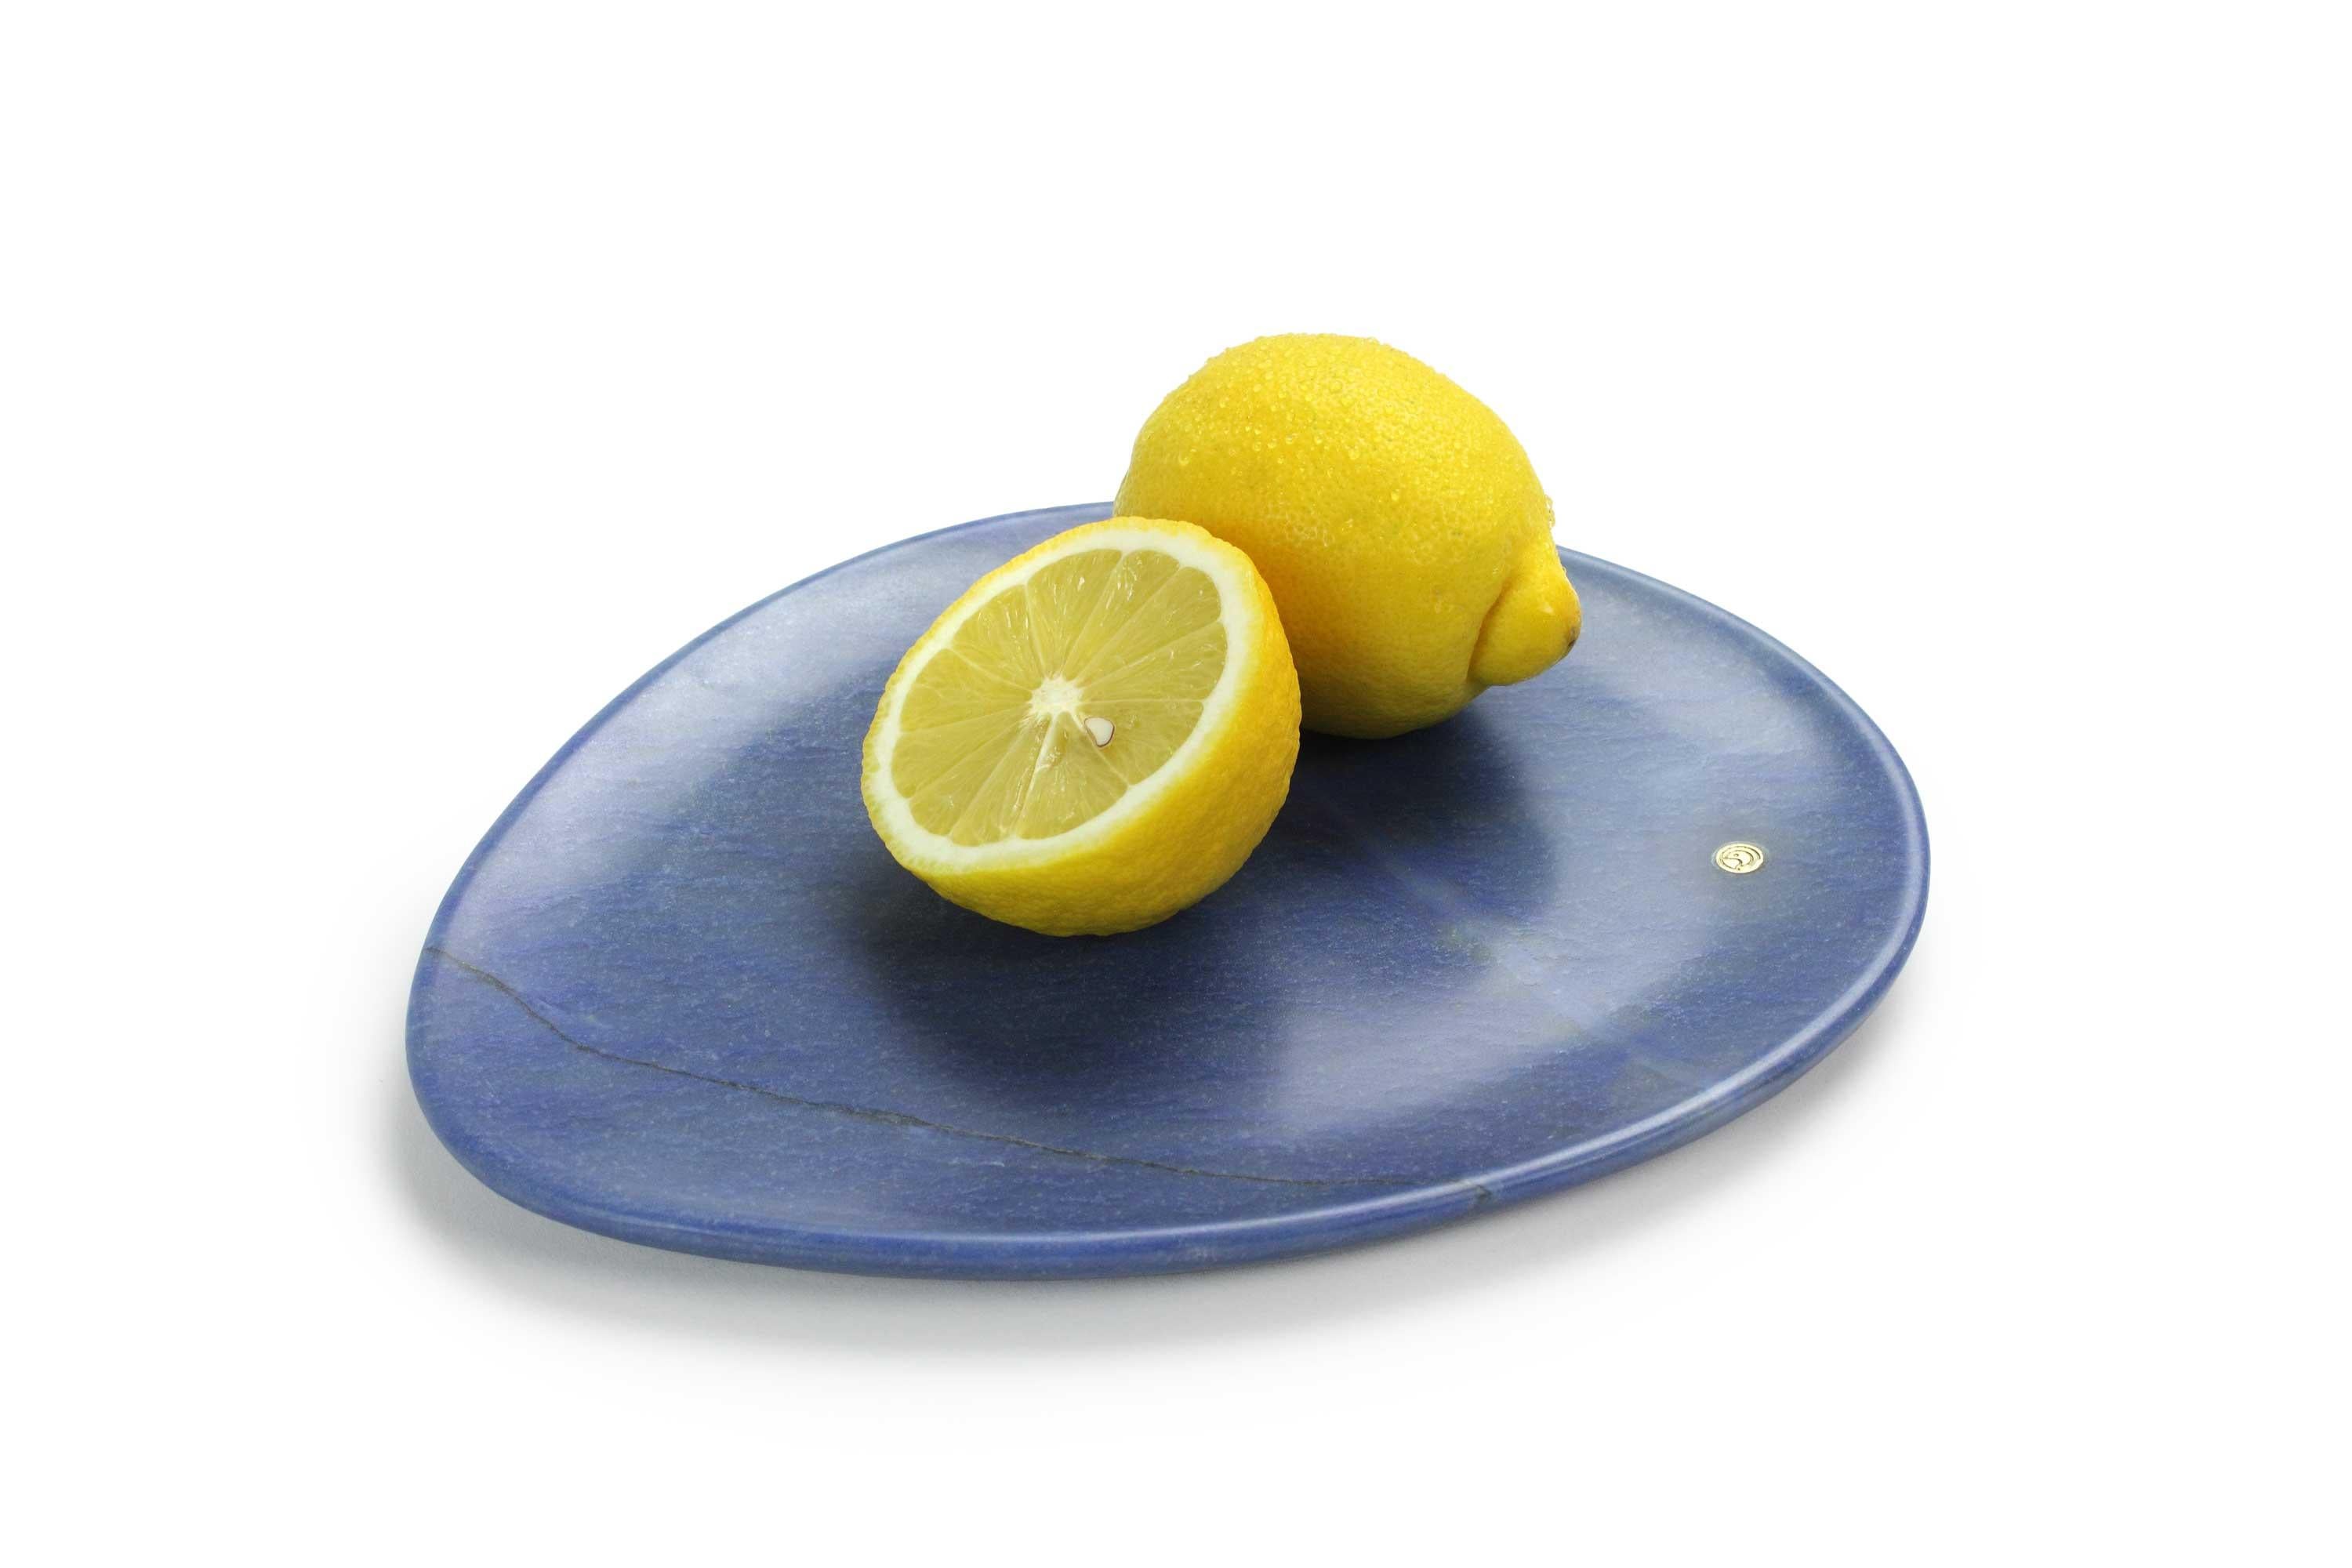 Hand carved presentation plate from semi-precious quartzite Azul Macaubas (Extra Blue).
Multiple use as plates, platters and placers. 

Dimensions: Small L 24, W 20, H 1.8 cm, also available: Medium L 30, W 28, H 1.8 cm, big L 36, W 35, H 1.8